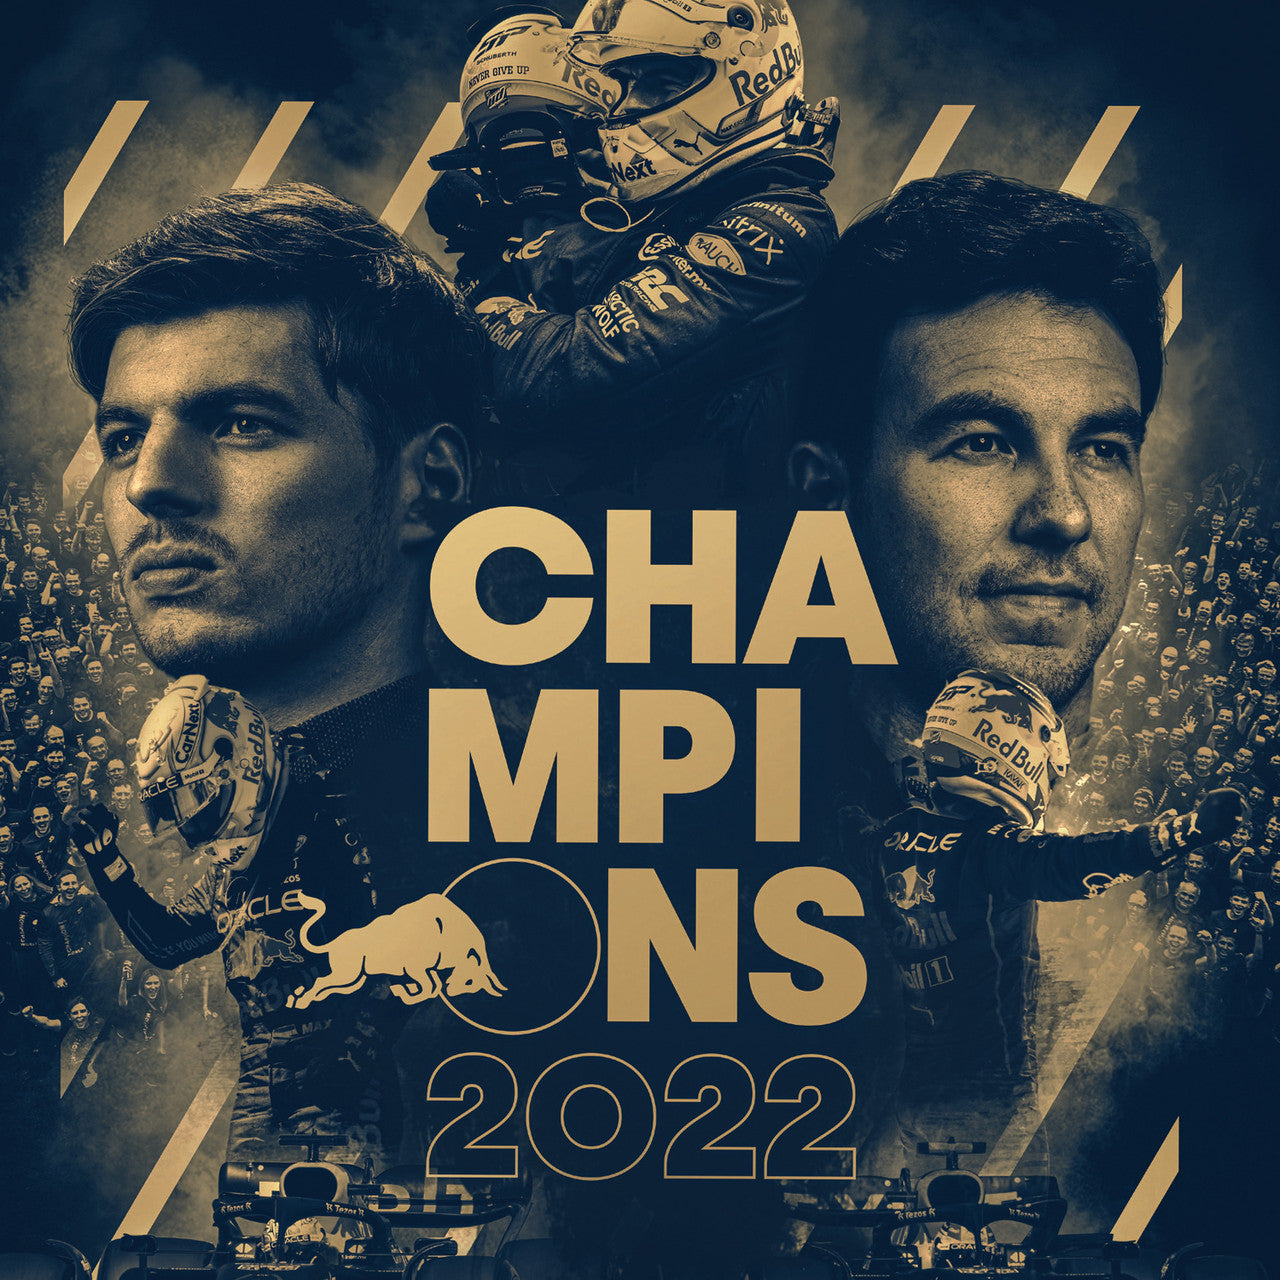 Oracle Red Bull Racing - F1® World Constructors' Champions - 2022